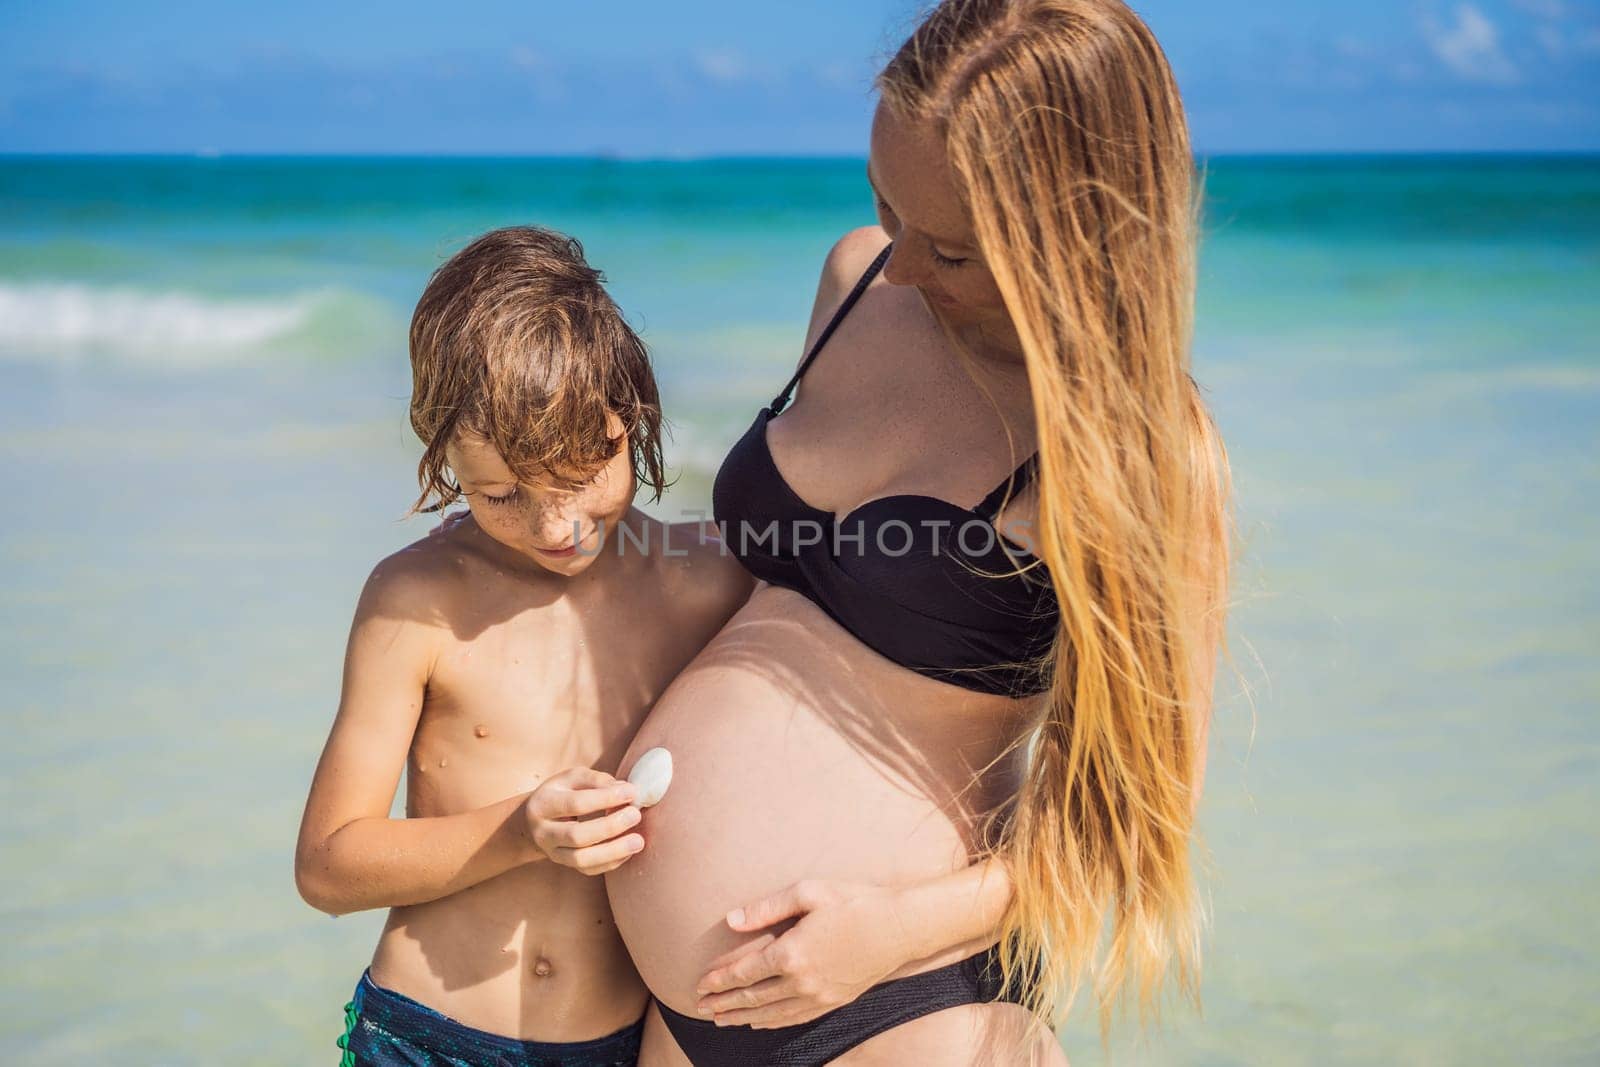 A picturesque moment: a pregnant woman and her son enjoying the turquoise sea, a heartwarming family bond by the tranquil shore.